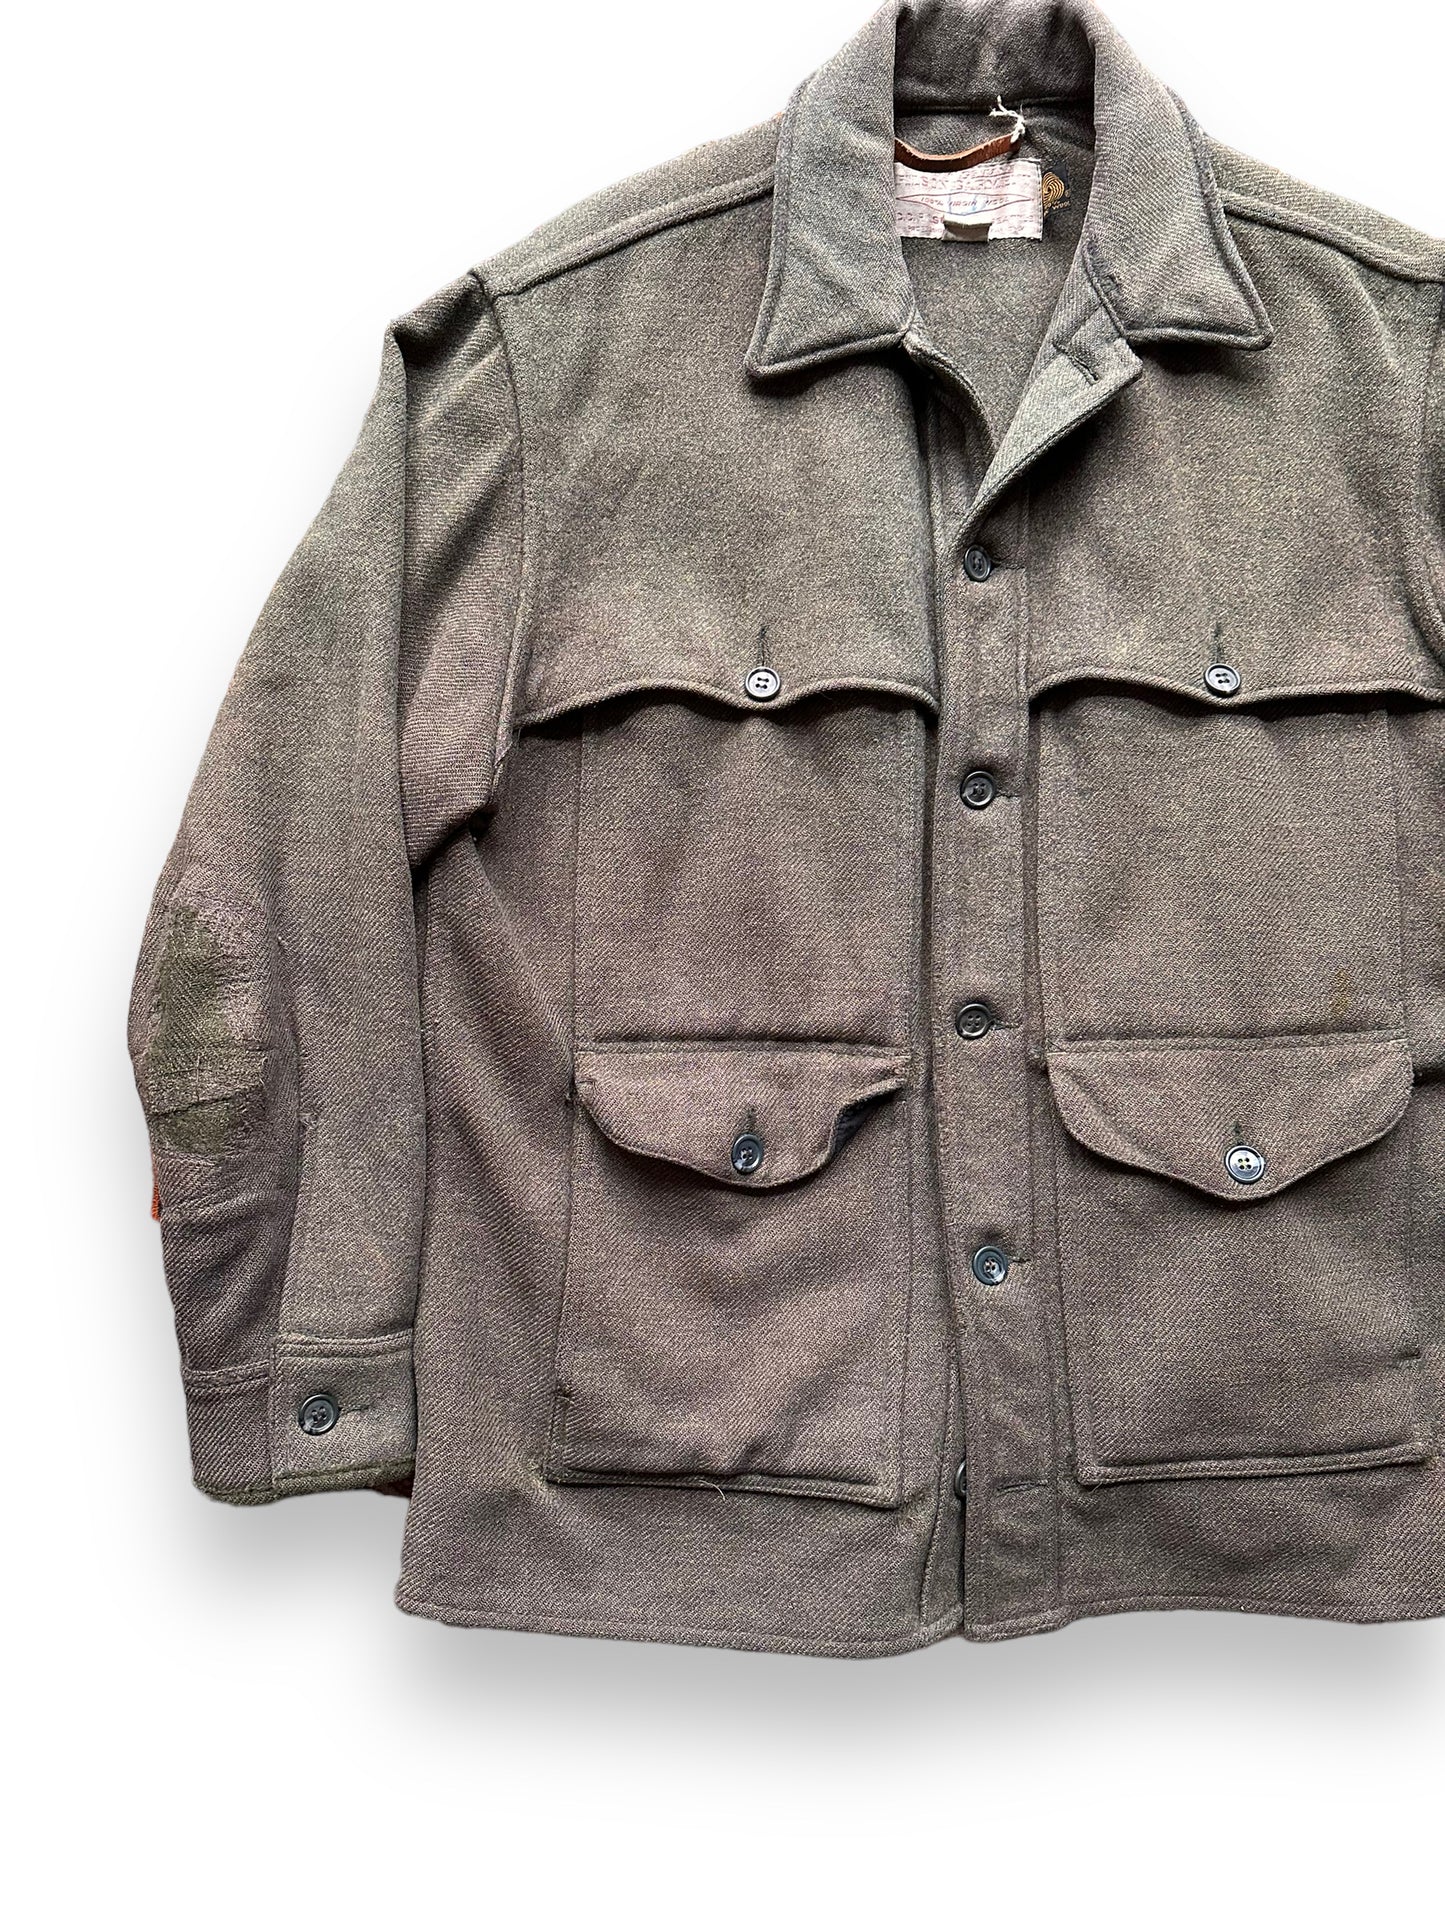 front right of Vintage 80s Filson Weathered Repaired Cape Coat SZ 42 |  Barn Owl Vintage Goods | Vintage Filson Workwear Seattle